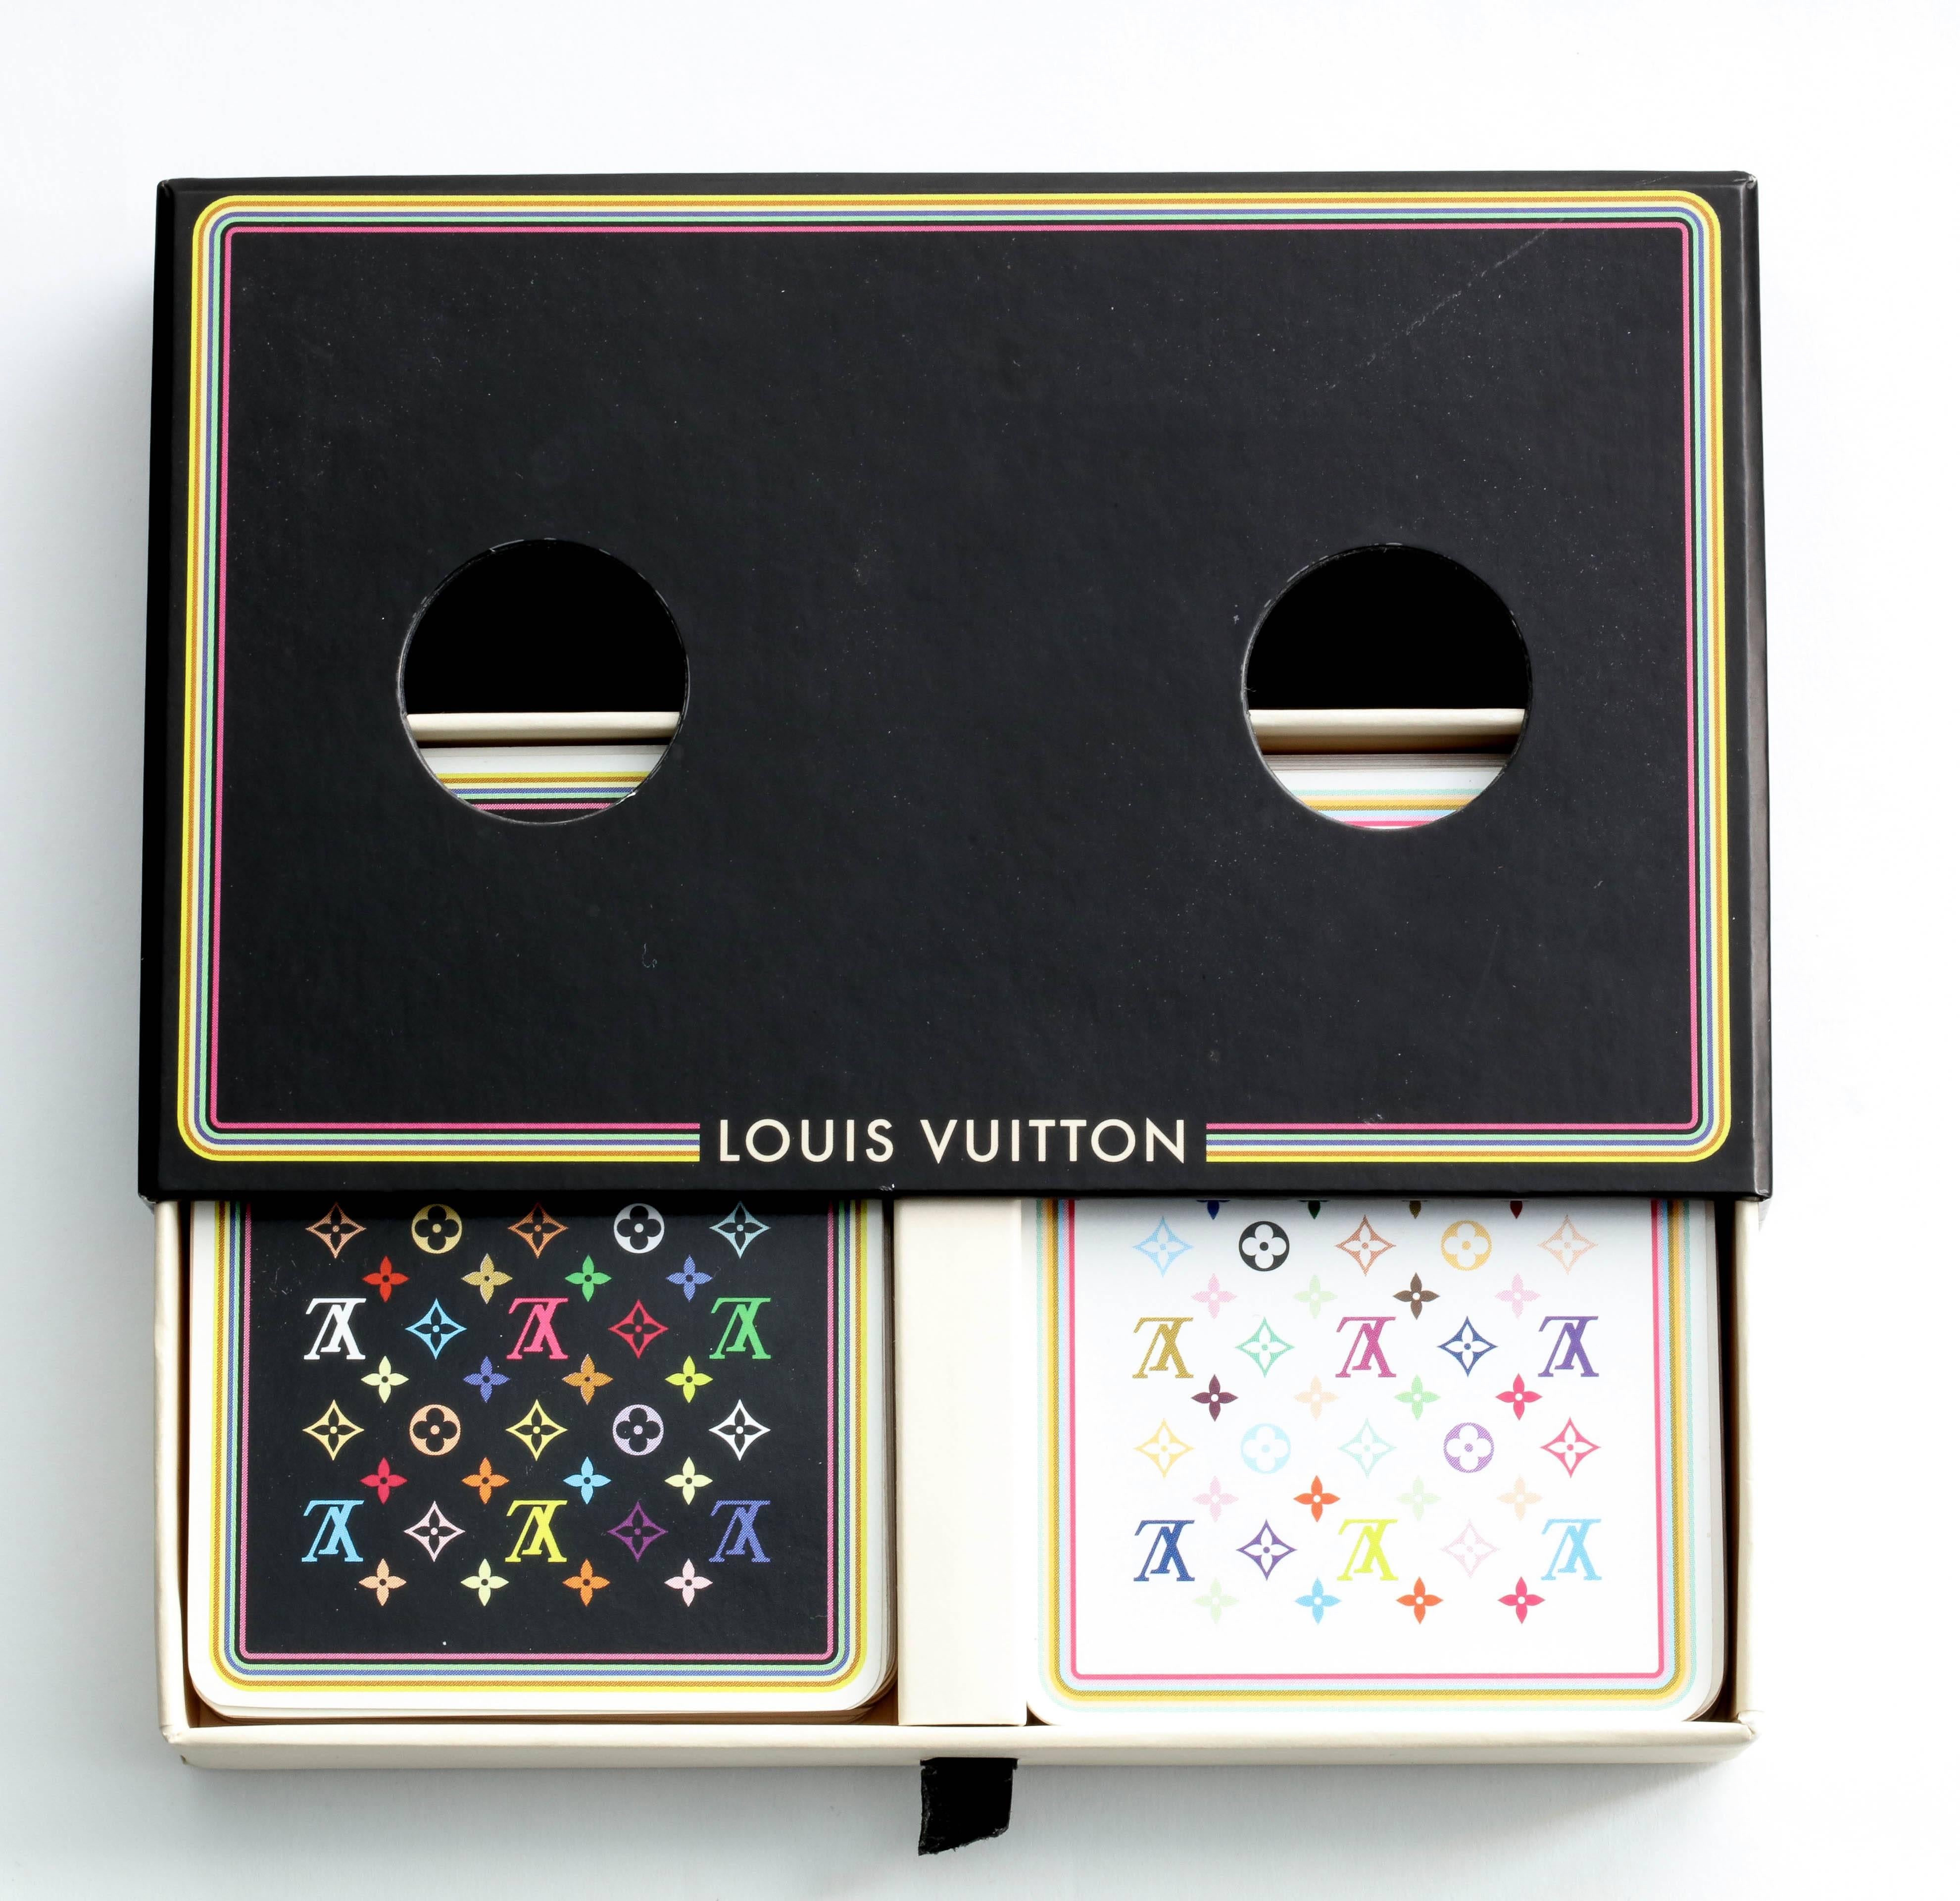 Extremely rare Louis Vuitton multicolor logo playing cards. There are 2 sets in a box. Designed by Takashi Murakami.
